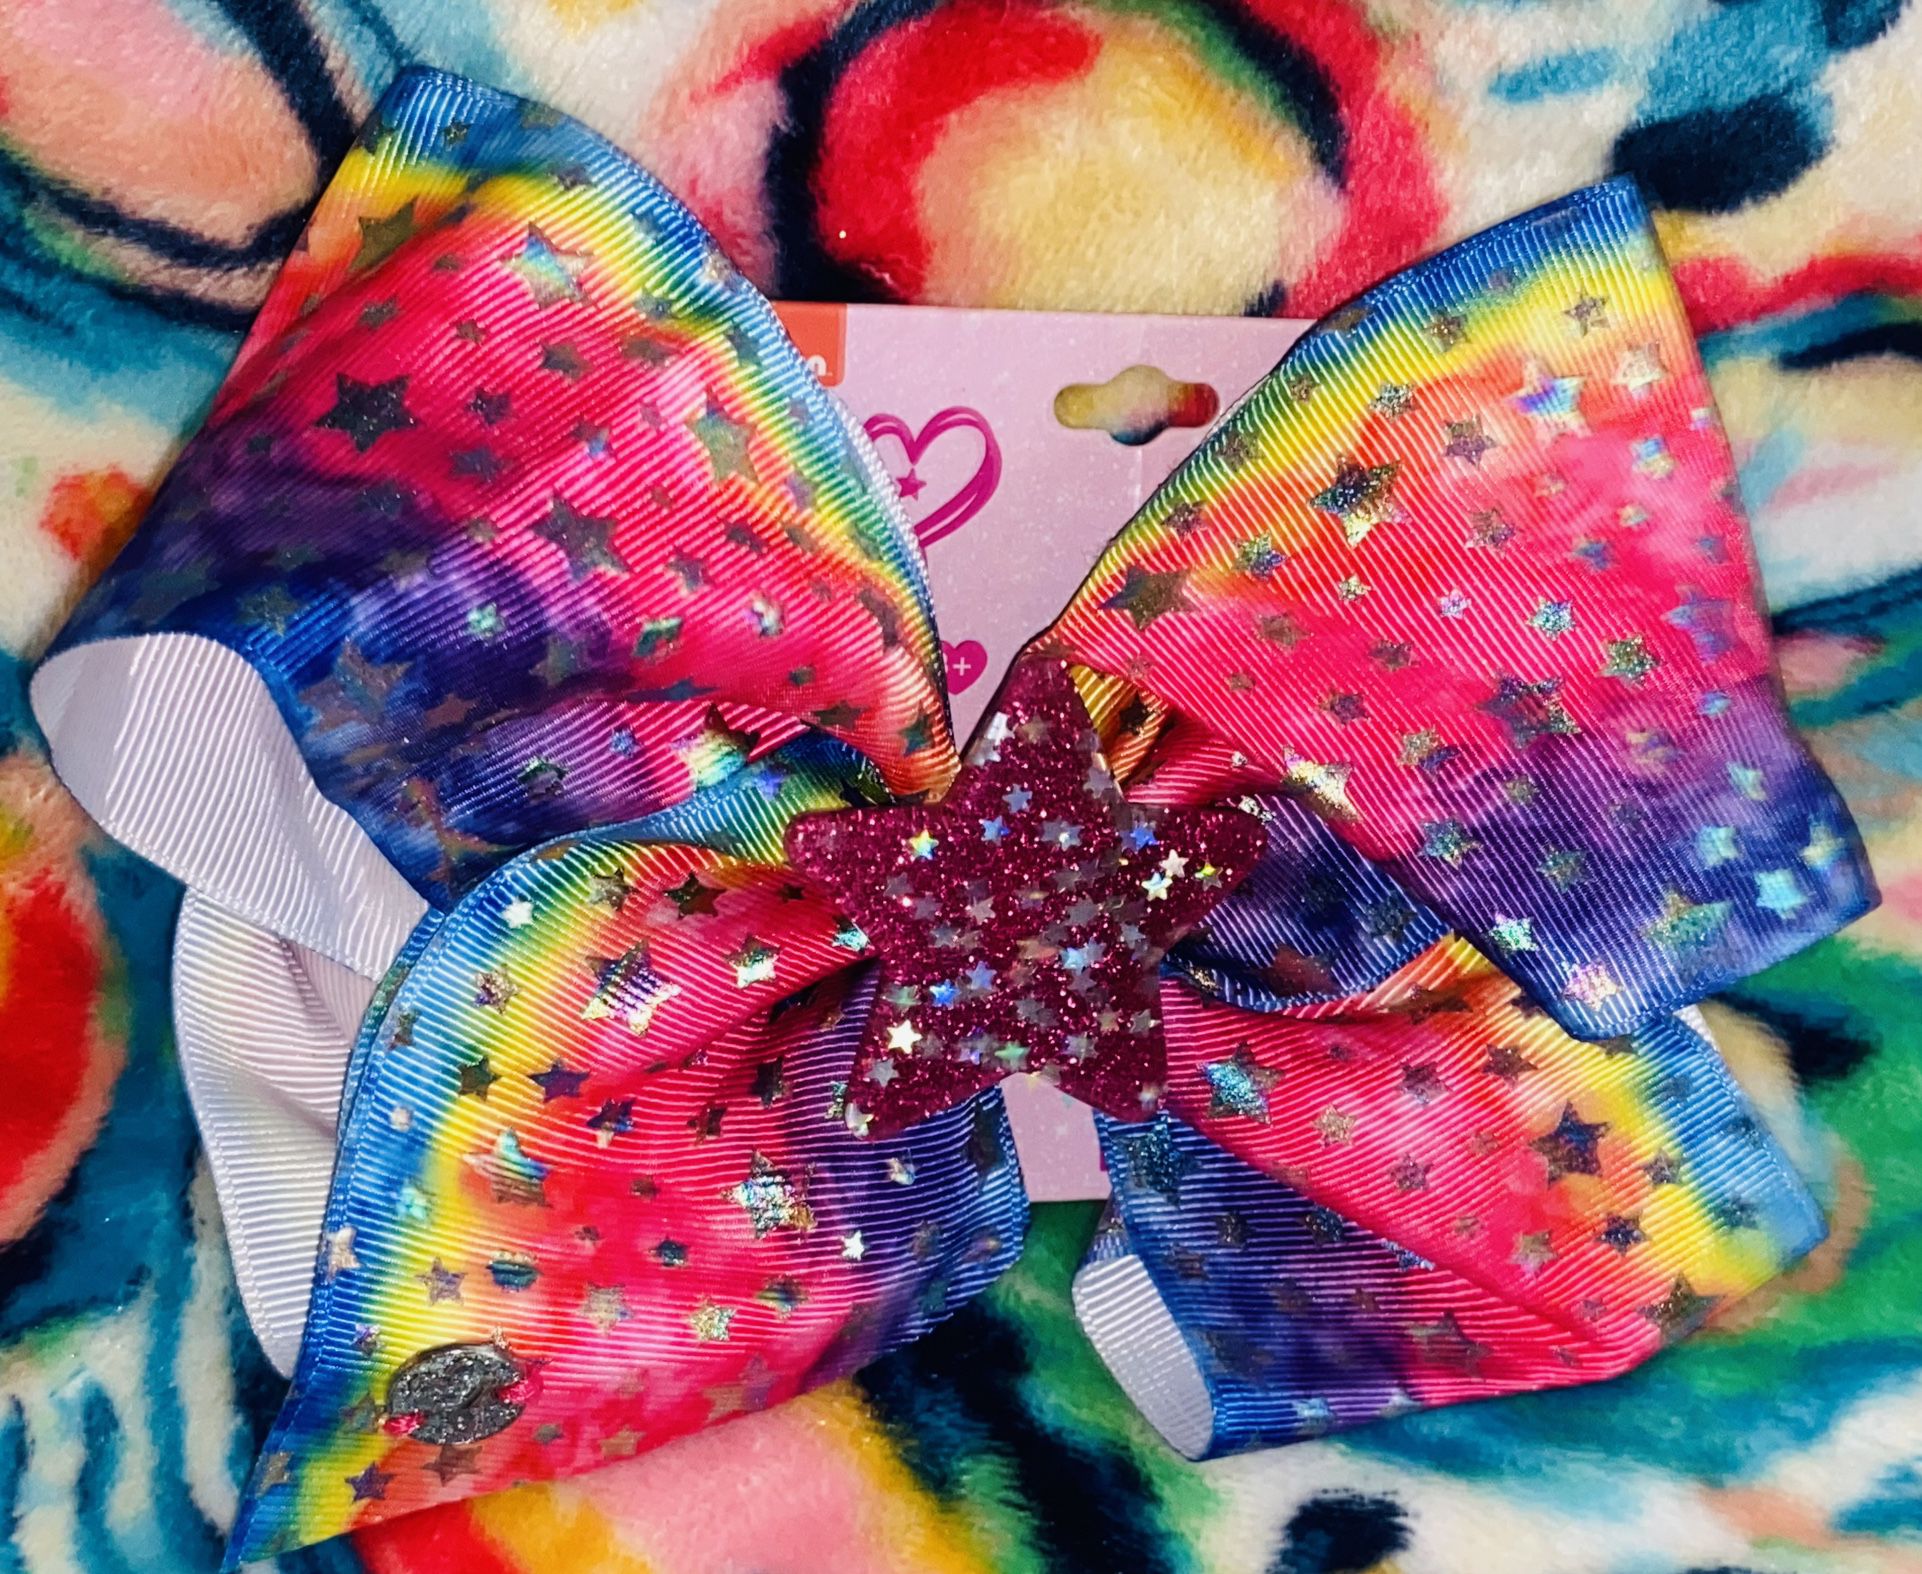 Nickeloden JoJo Siwa Bright Colored Rainbow W: Silver Star Prints Hair Clip In Bow 